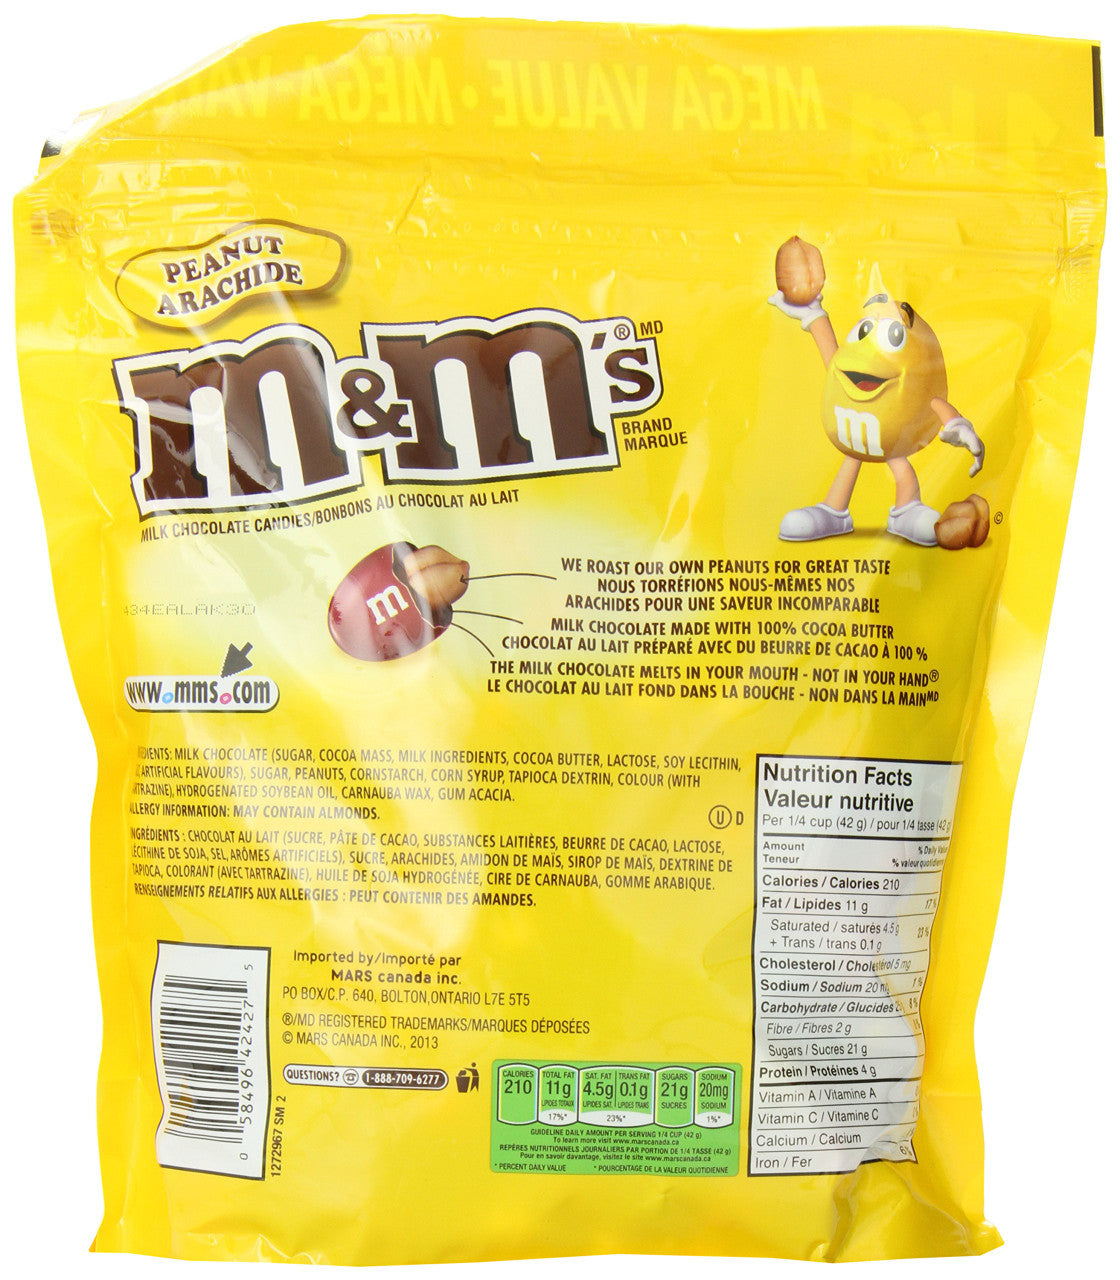 M&Ms Peanut Butter, Chocolate Candy, Bowl Size (400g /14 oz.) Bag